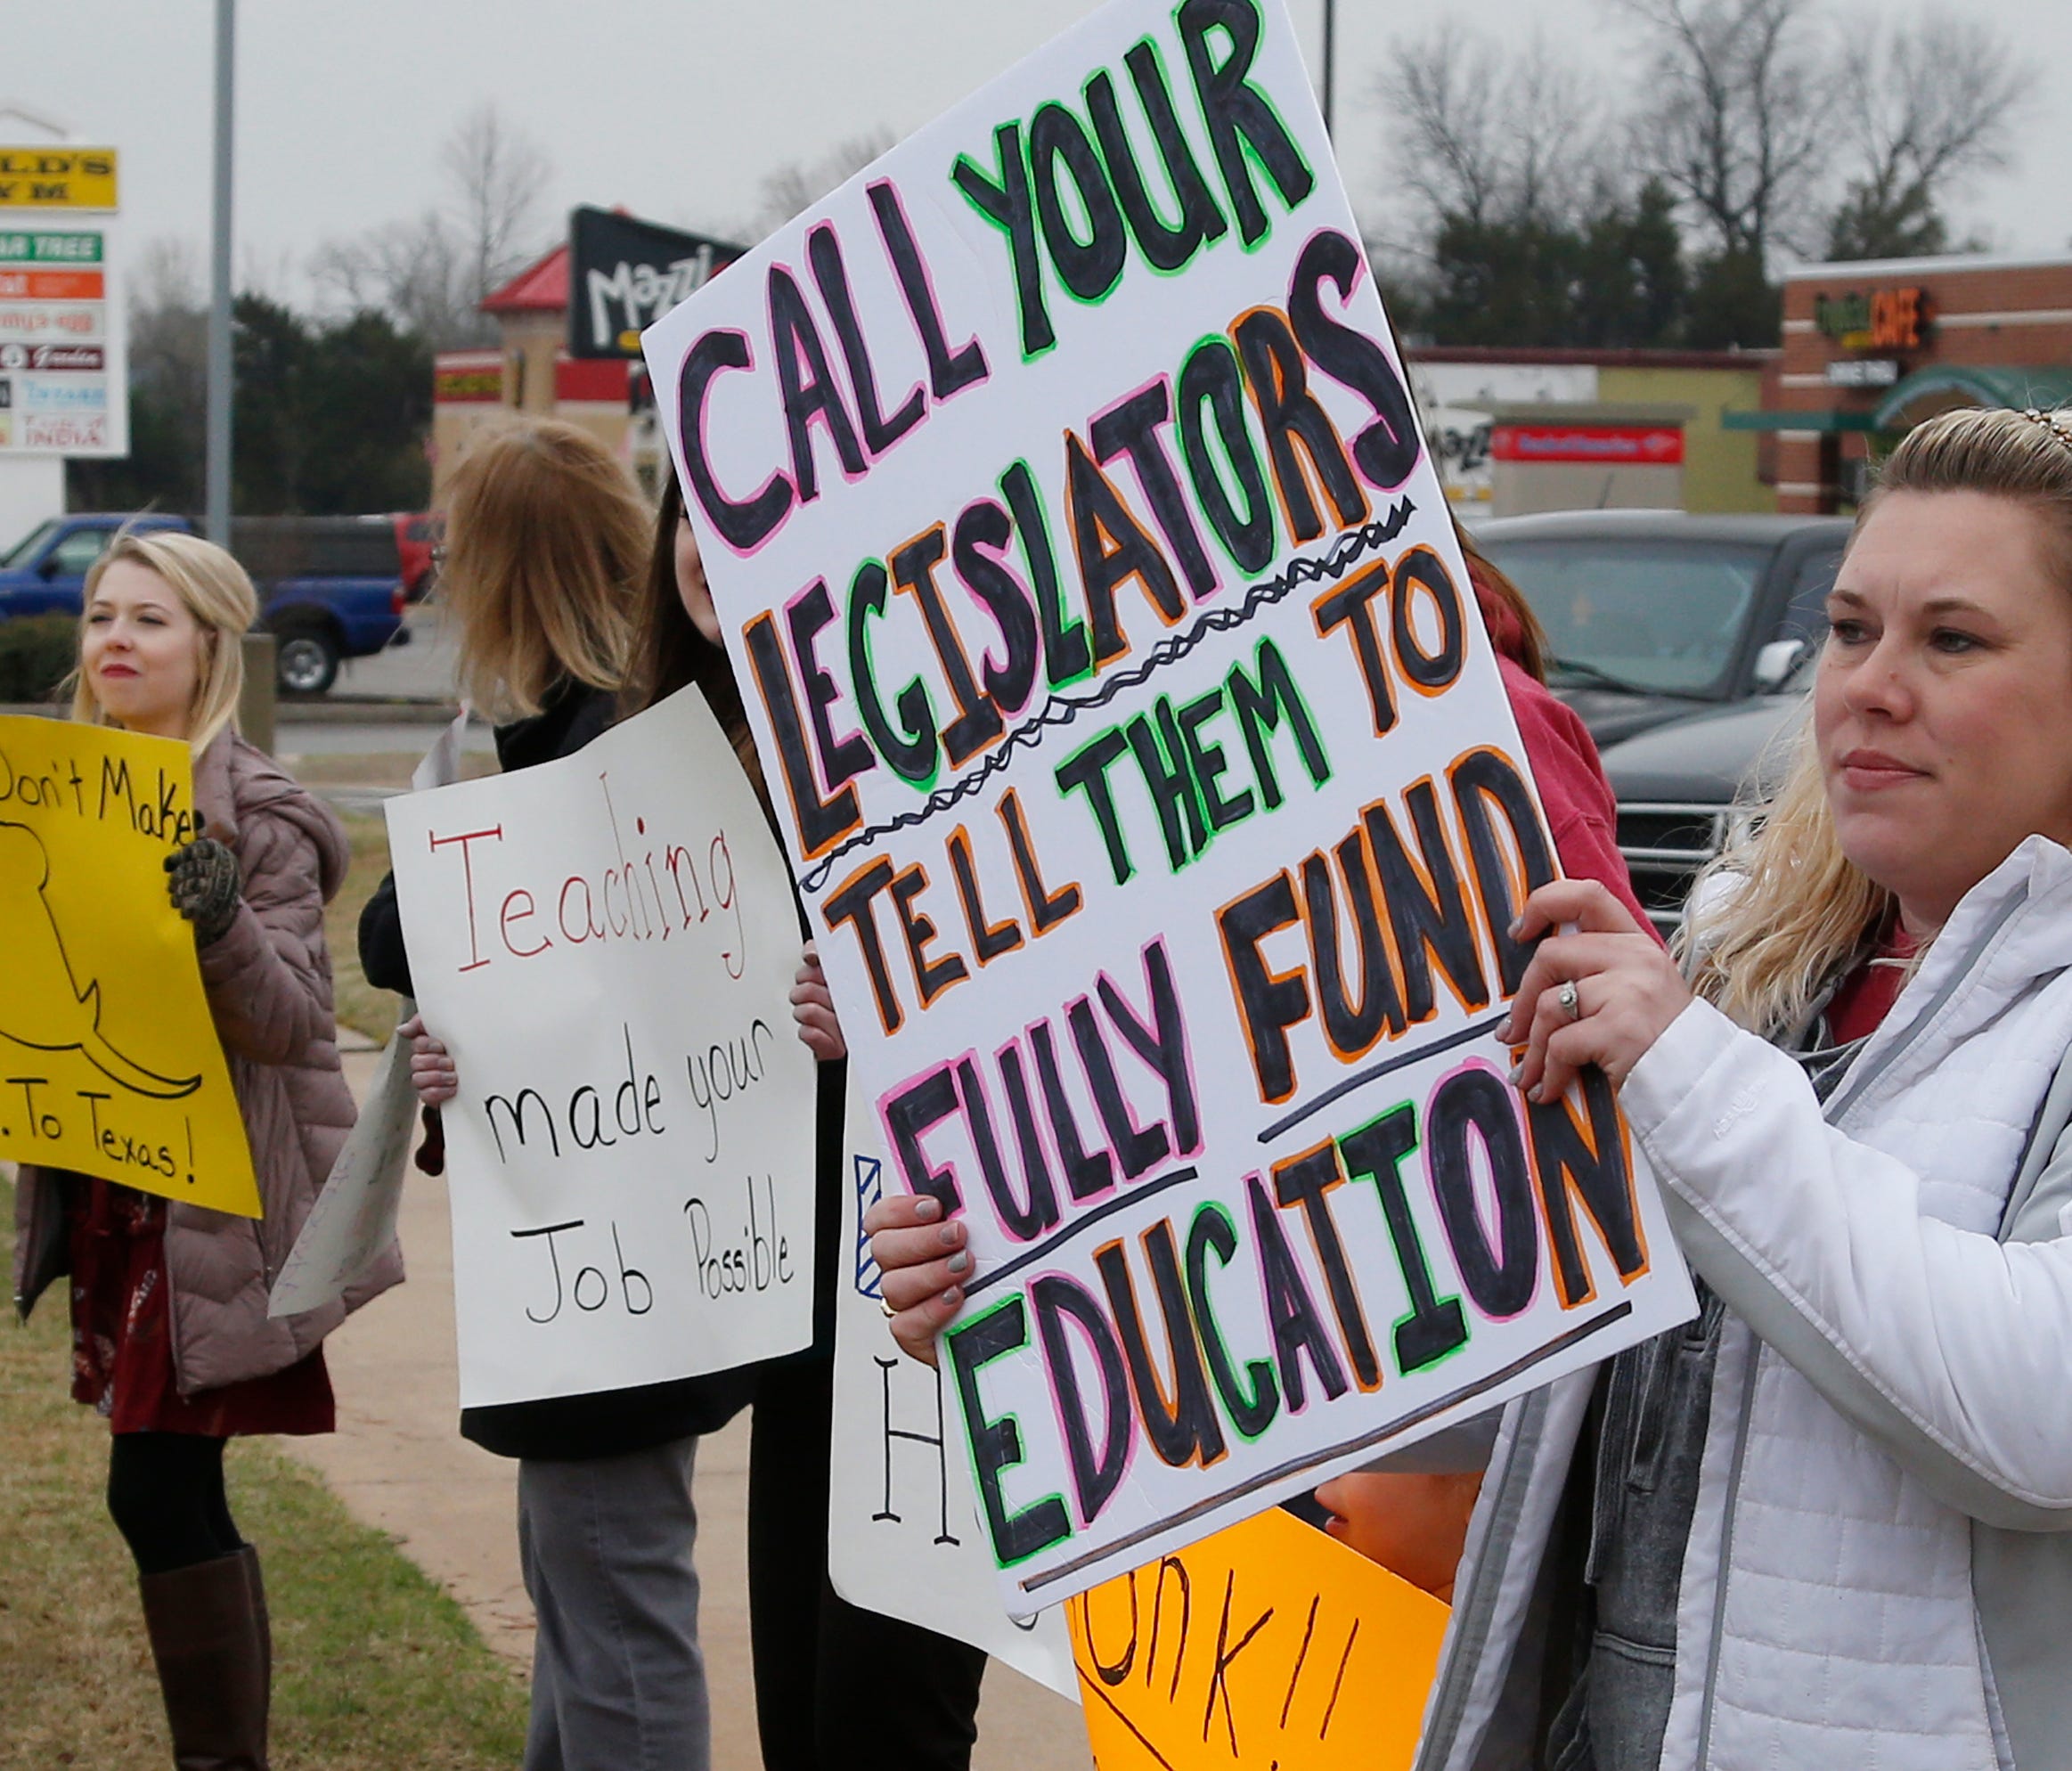 In this Tuesday, March 27, 2018, photo, teacher Adrien Gates pickets with other educators on a street corner in Norman, Okla.